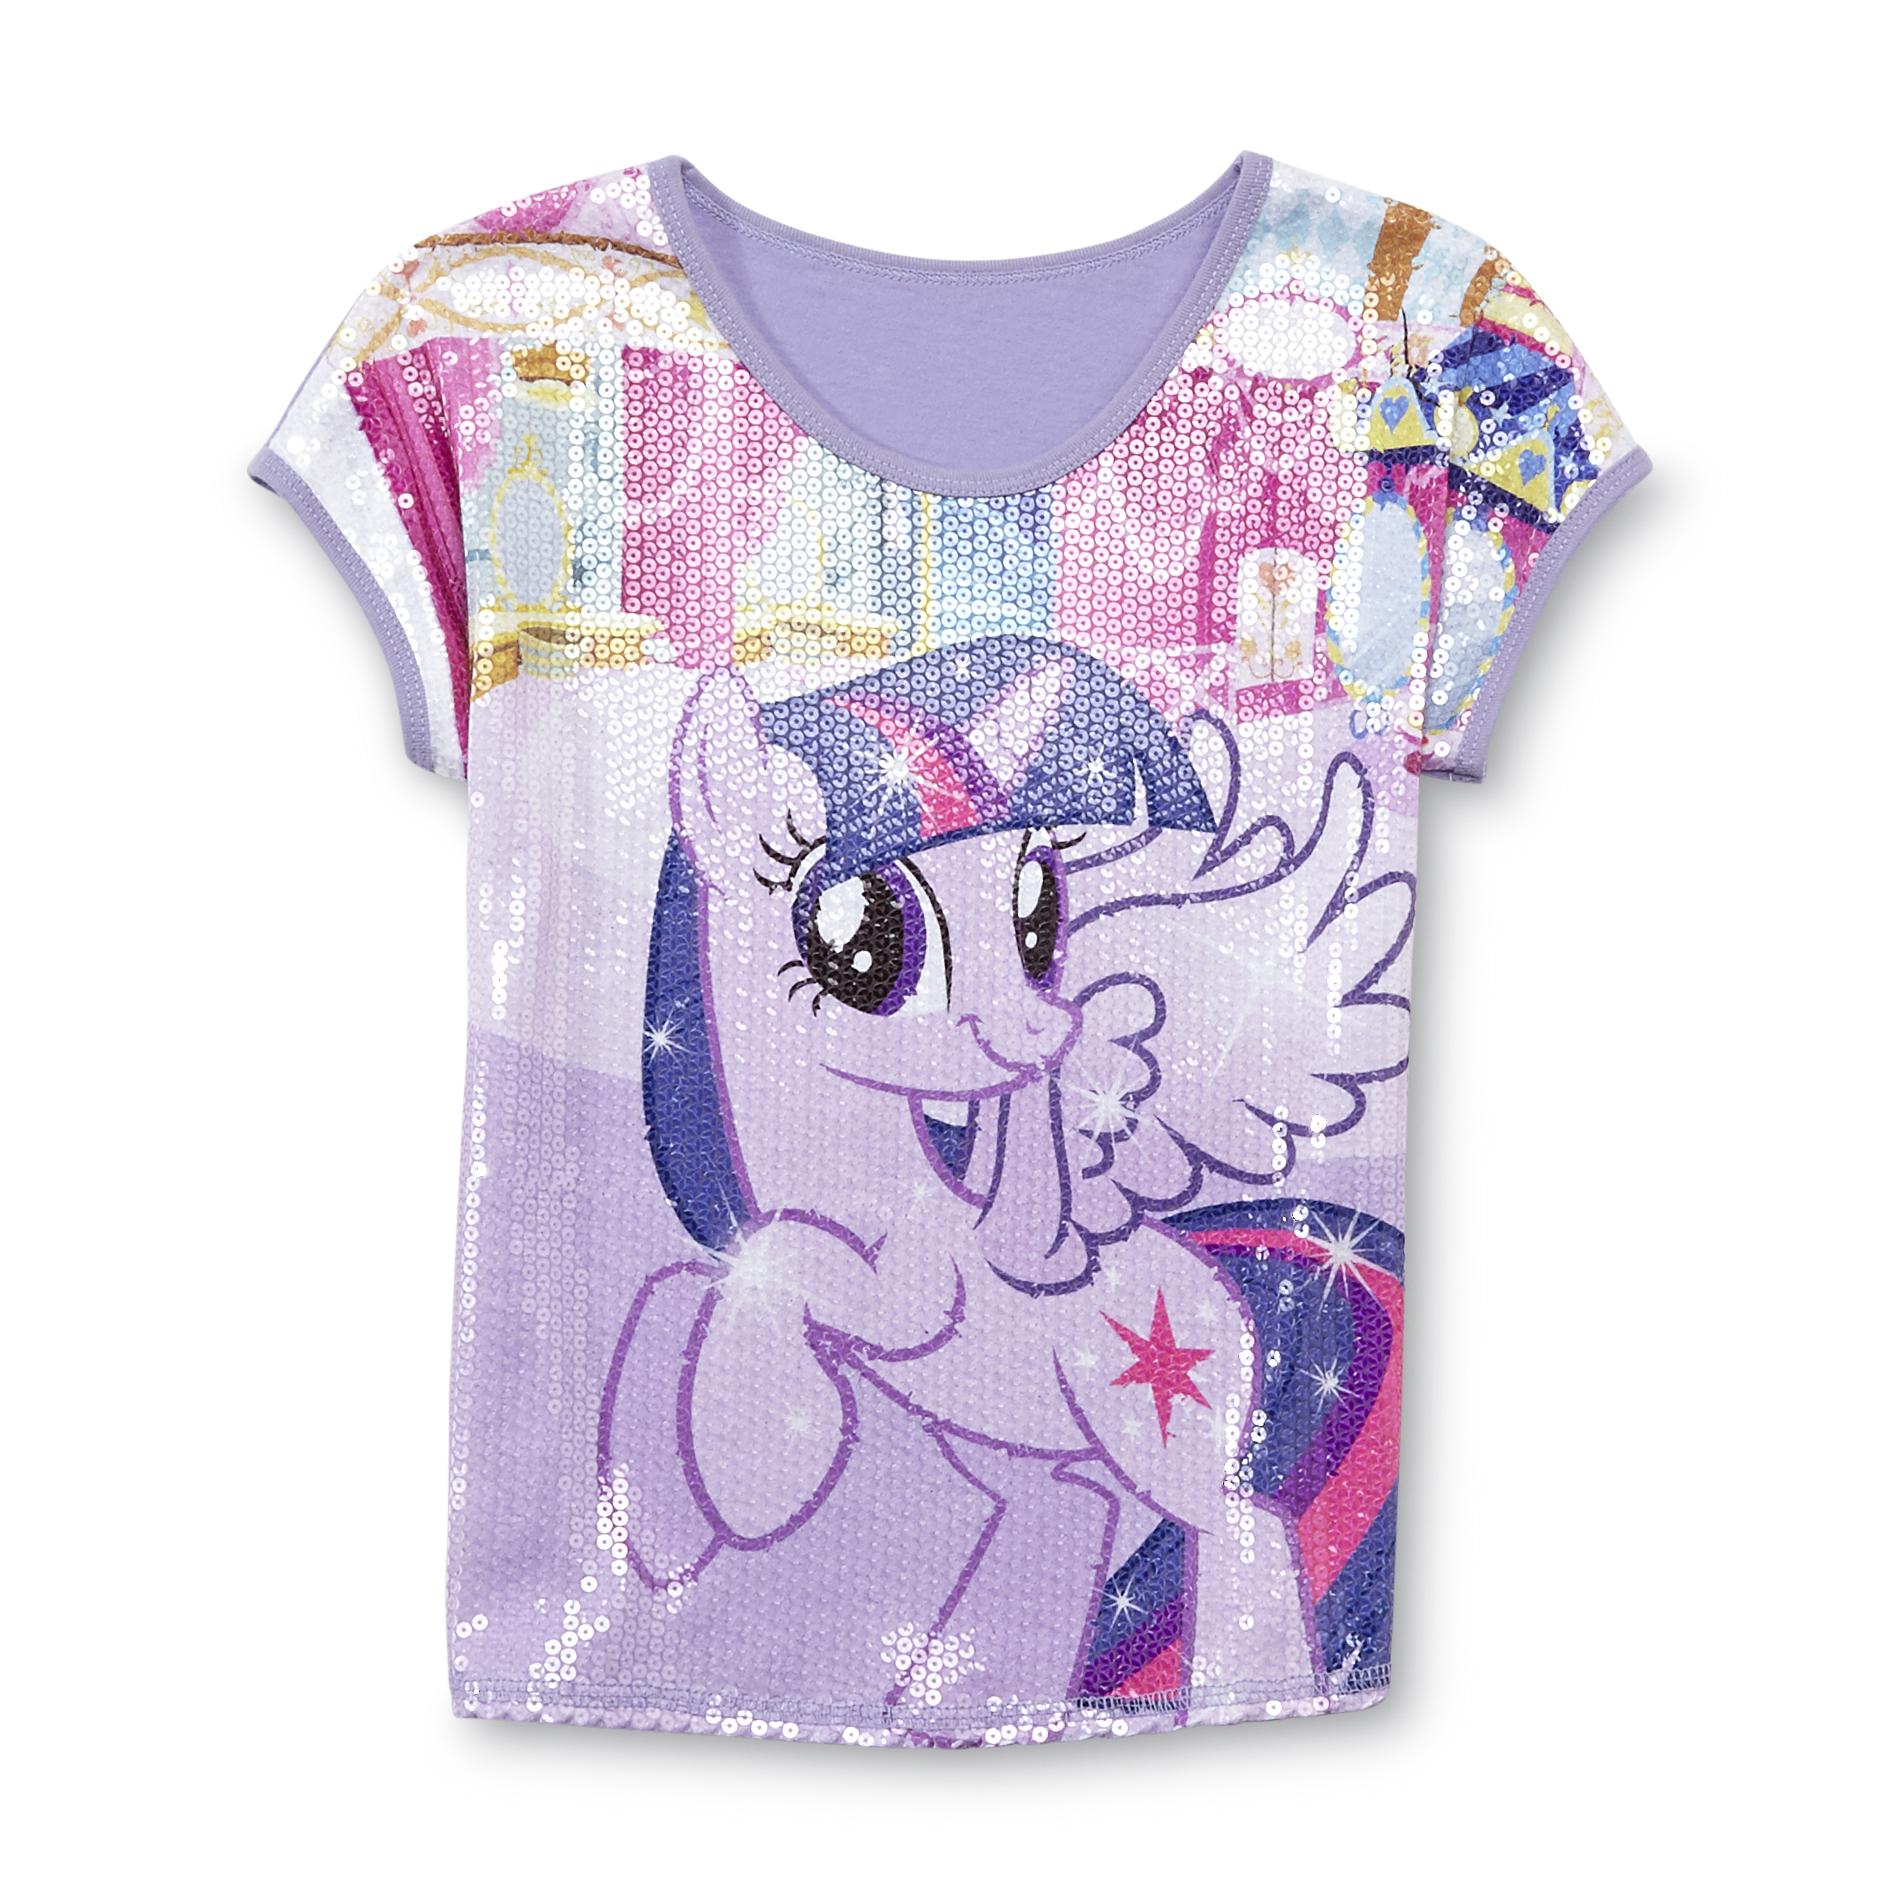 My Little Pony Girl's Graphic T-Shirt - Twilight Sparkle